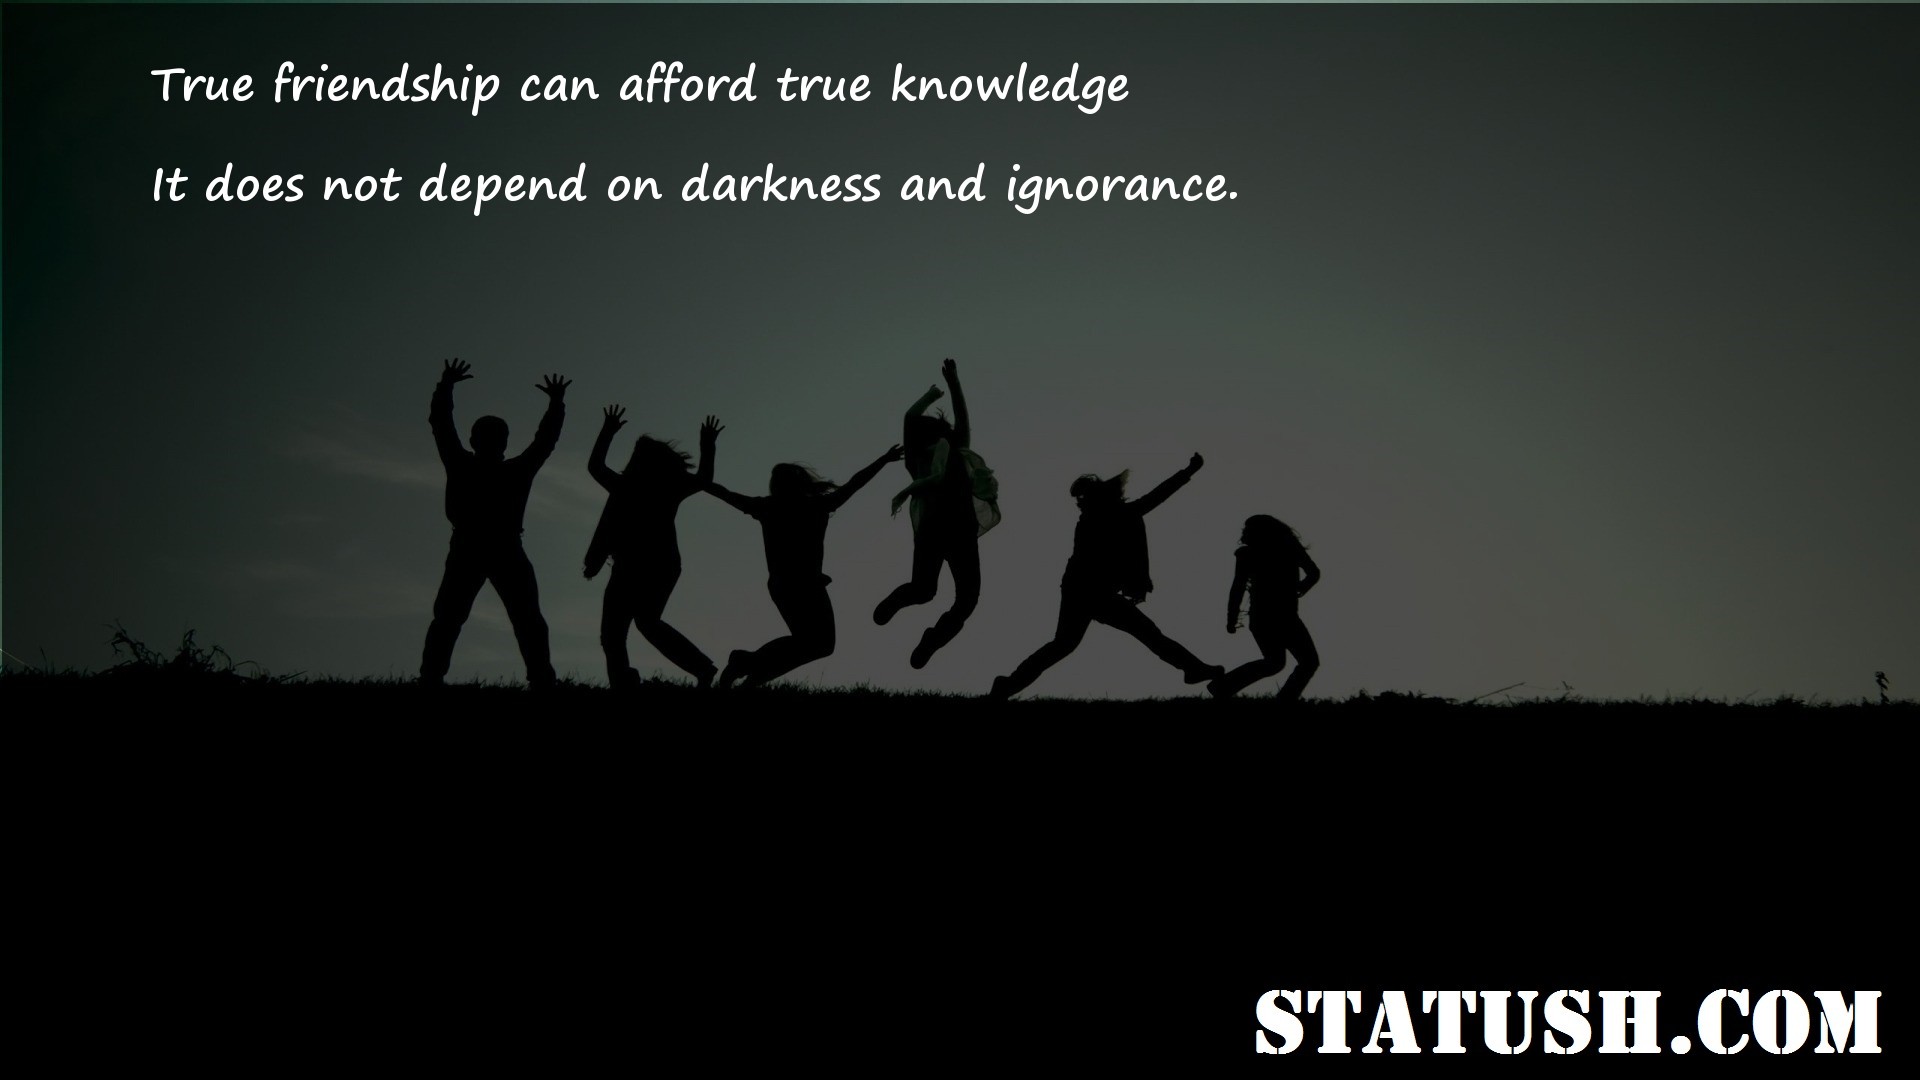 True friendship can afford true knowledge - Friendship Quotes at statush.com